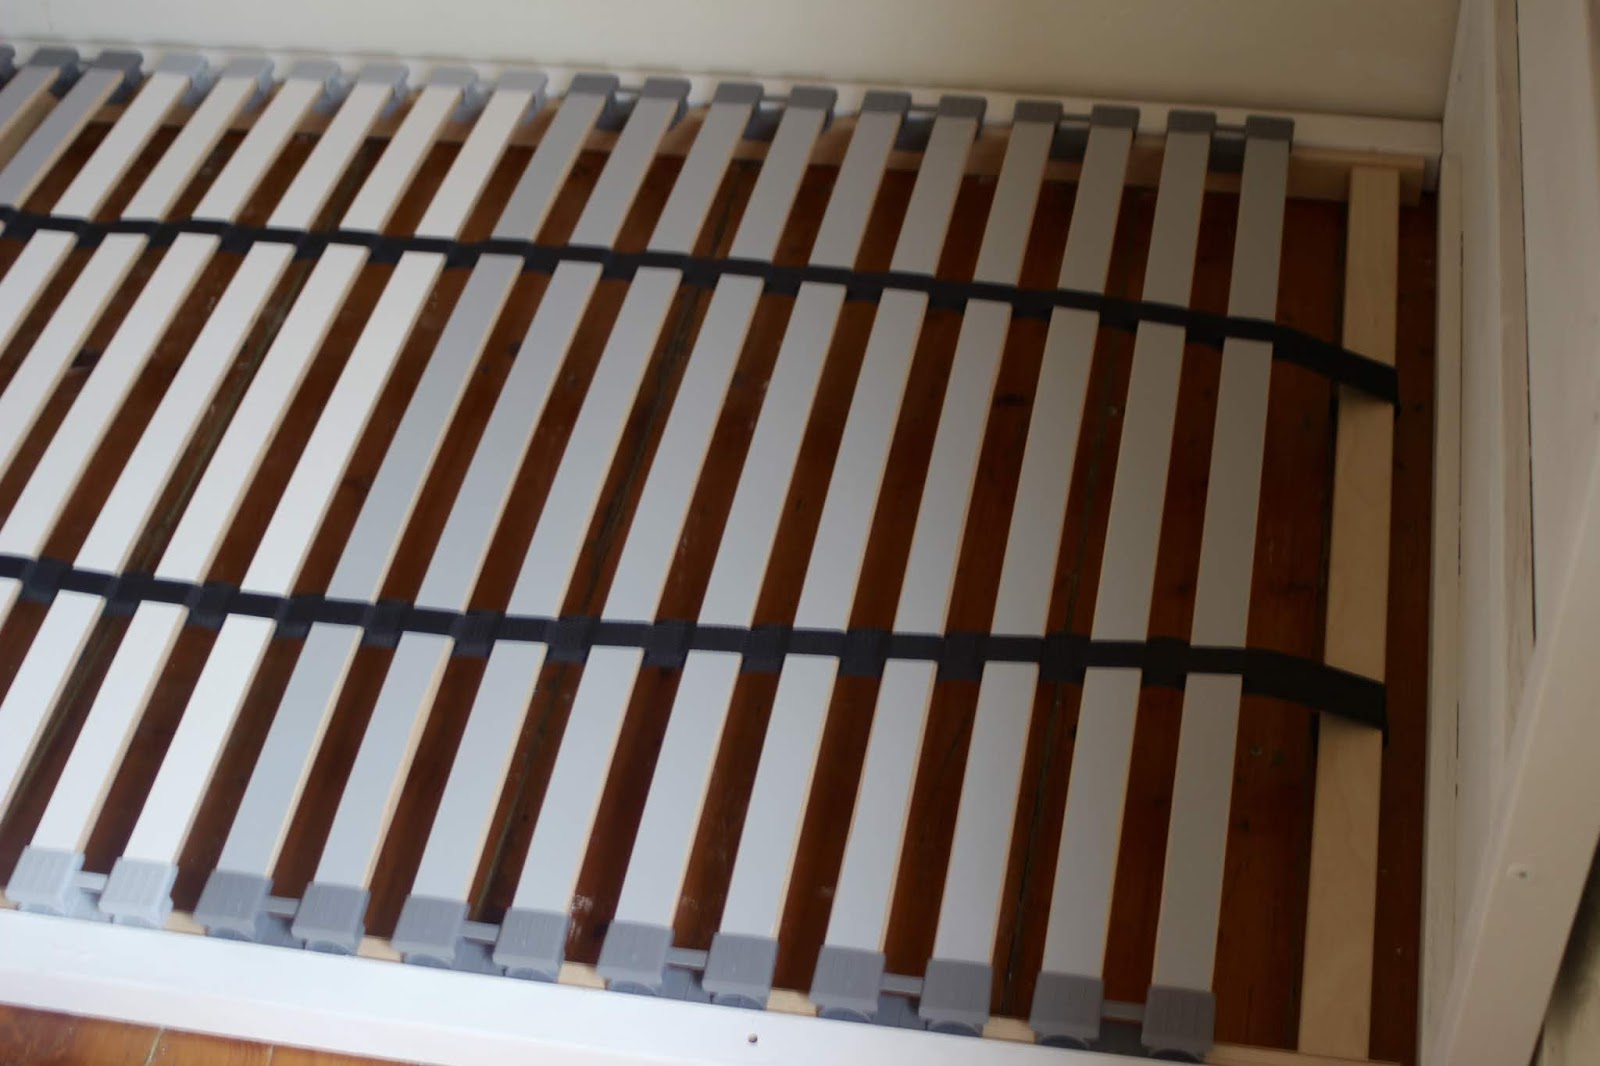 Simple Ikea Kura Bunk Bed The, Do Bed Slats Go Up Or Down